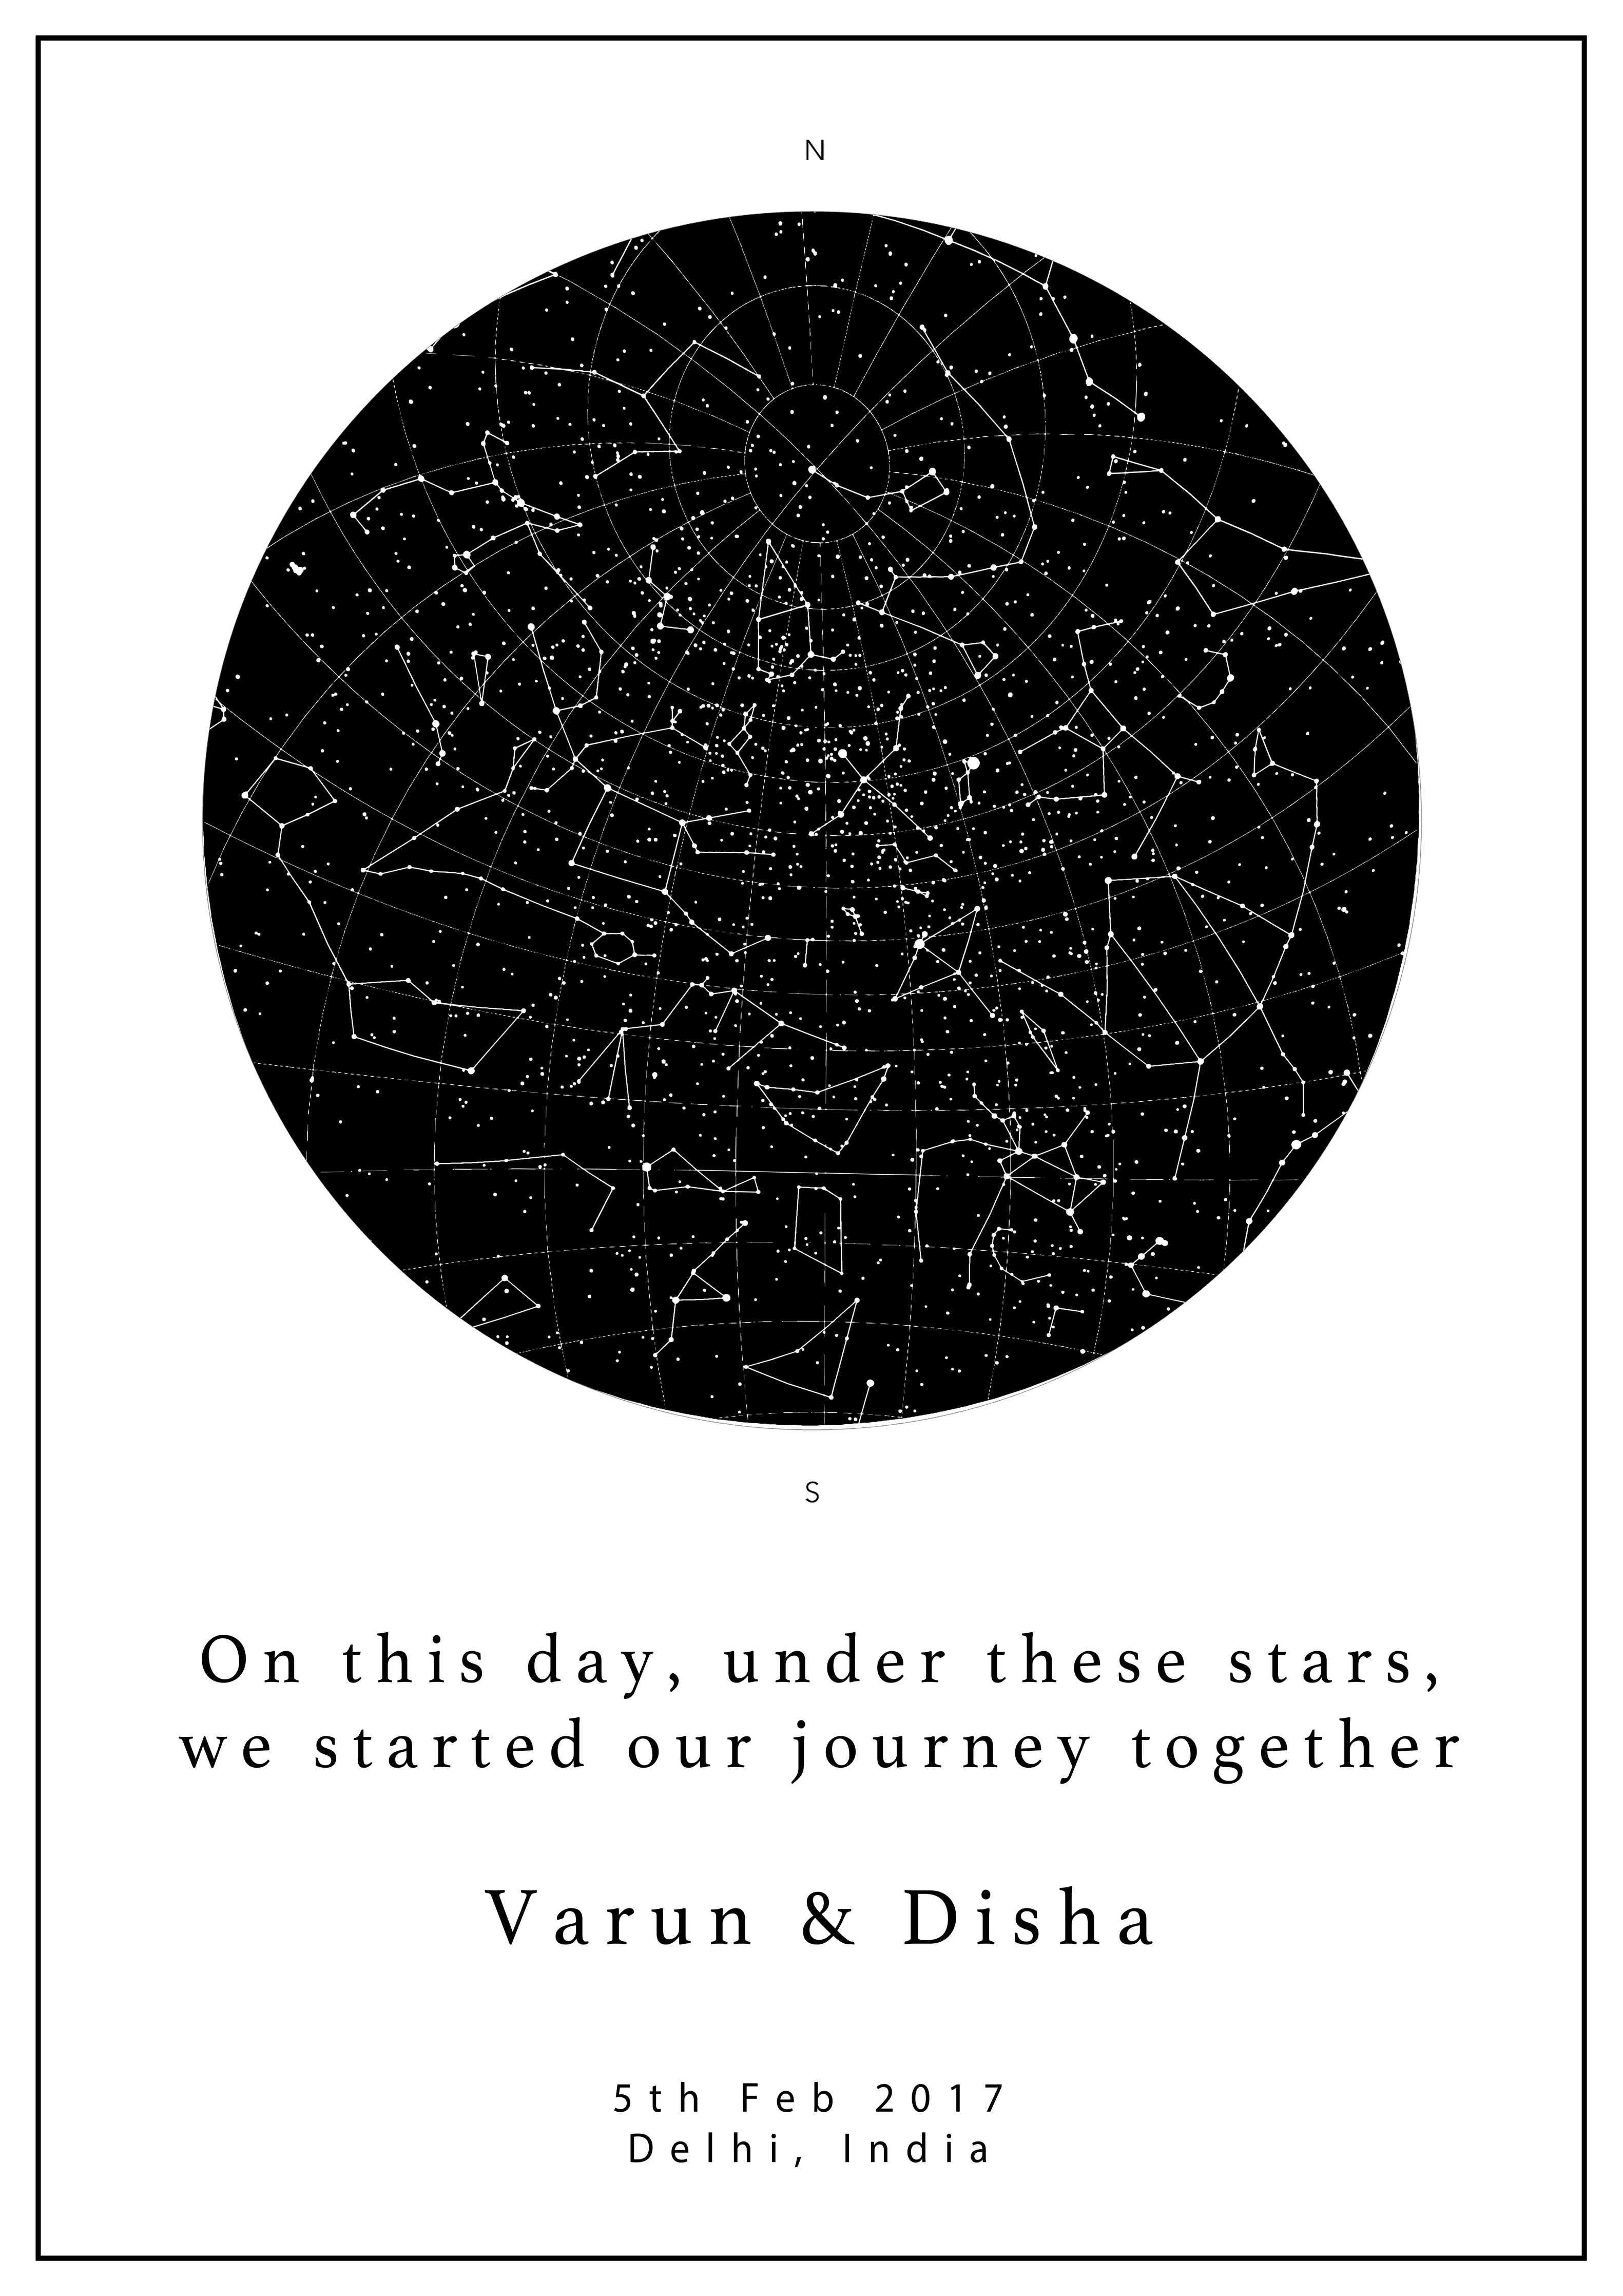 Gift a Personalized Star Map - Gift Night Sky